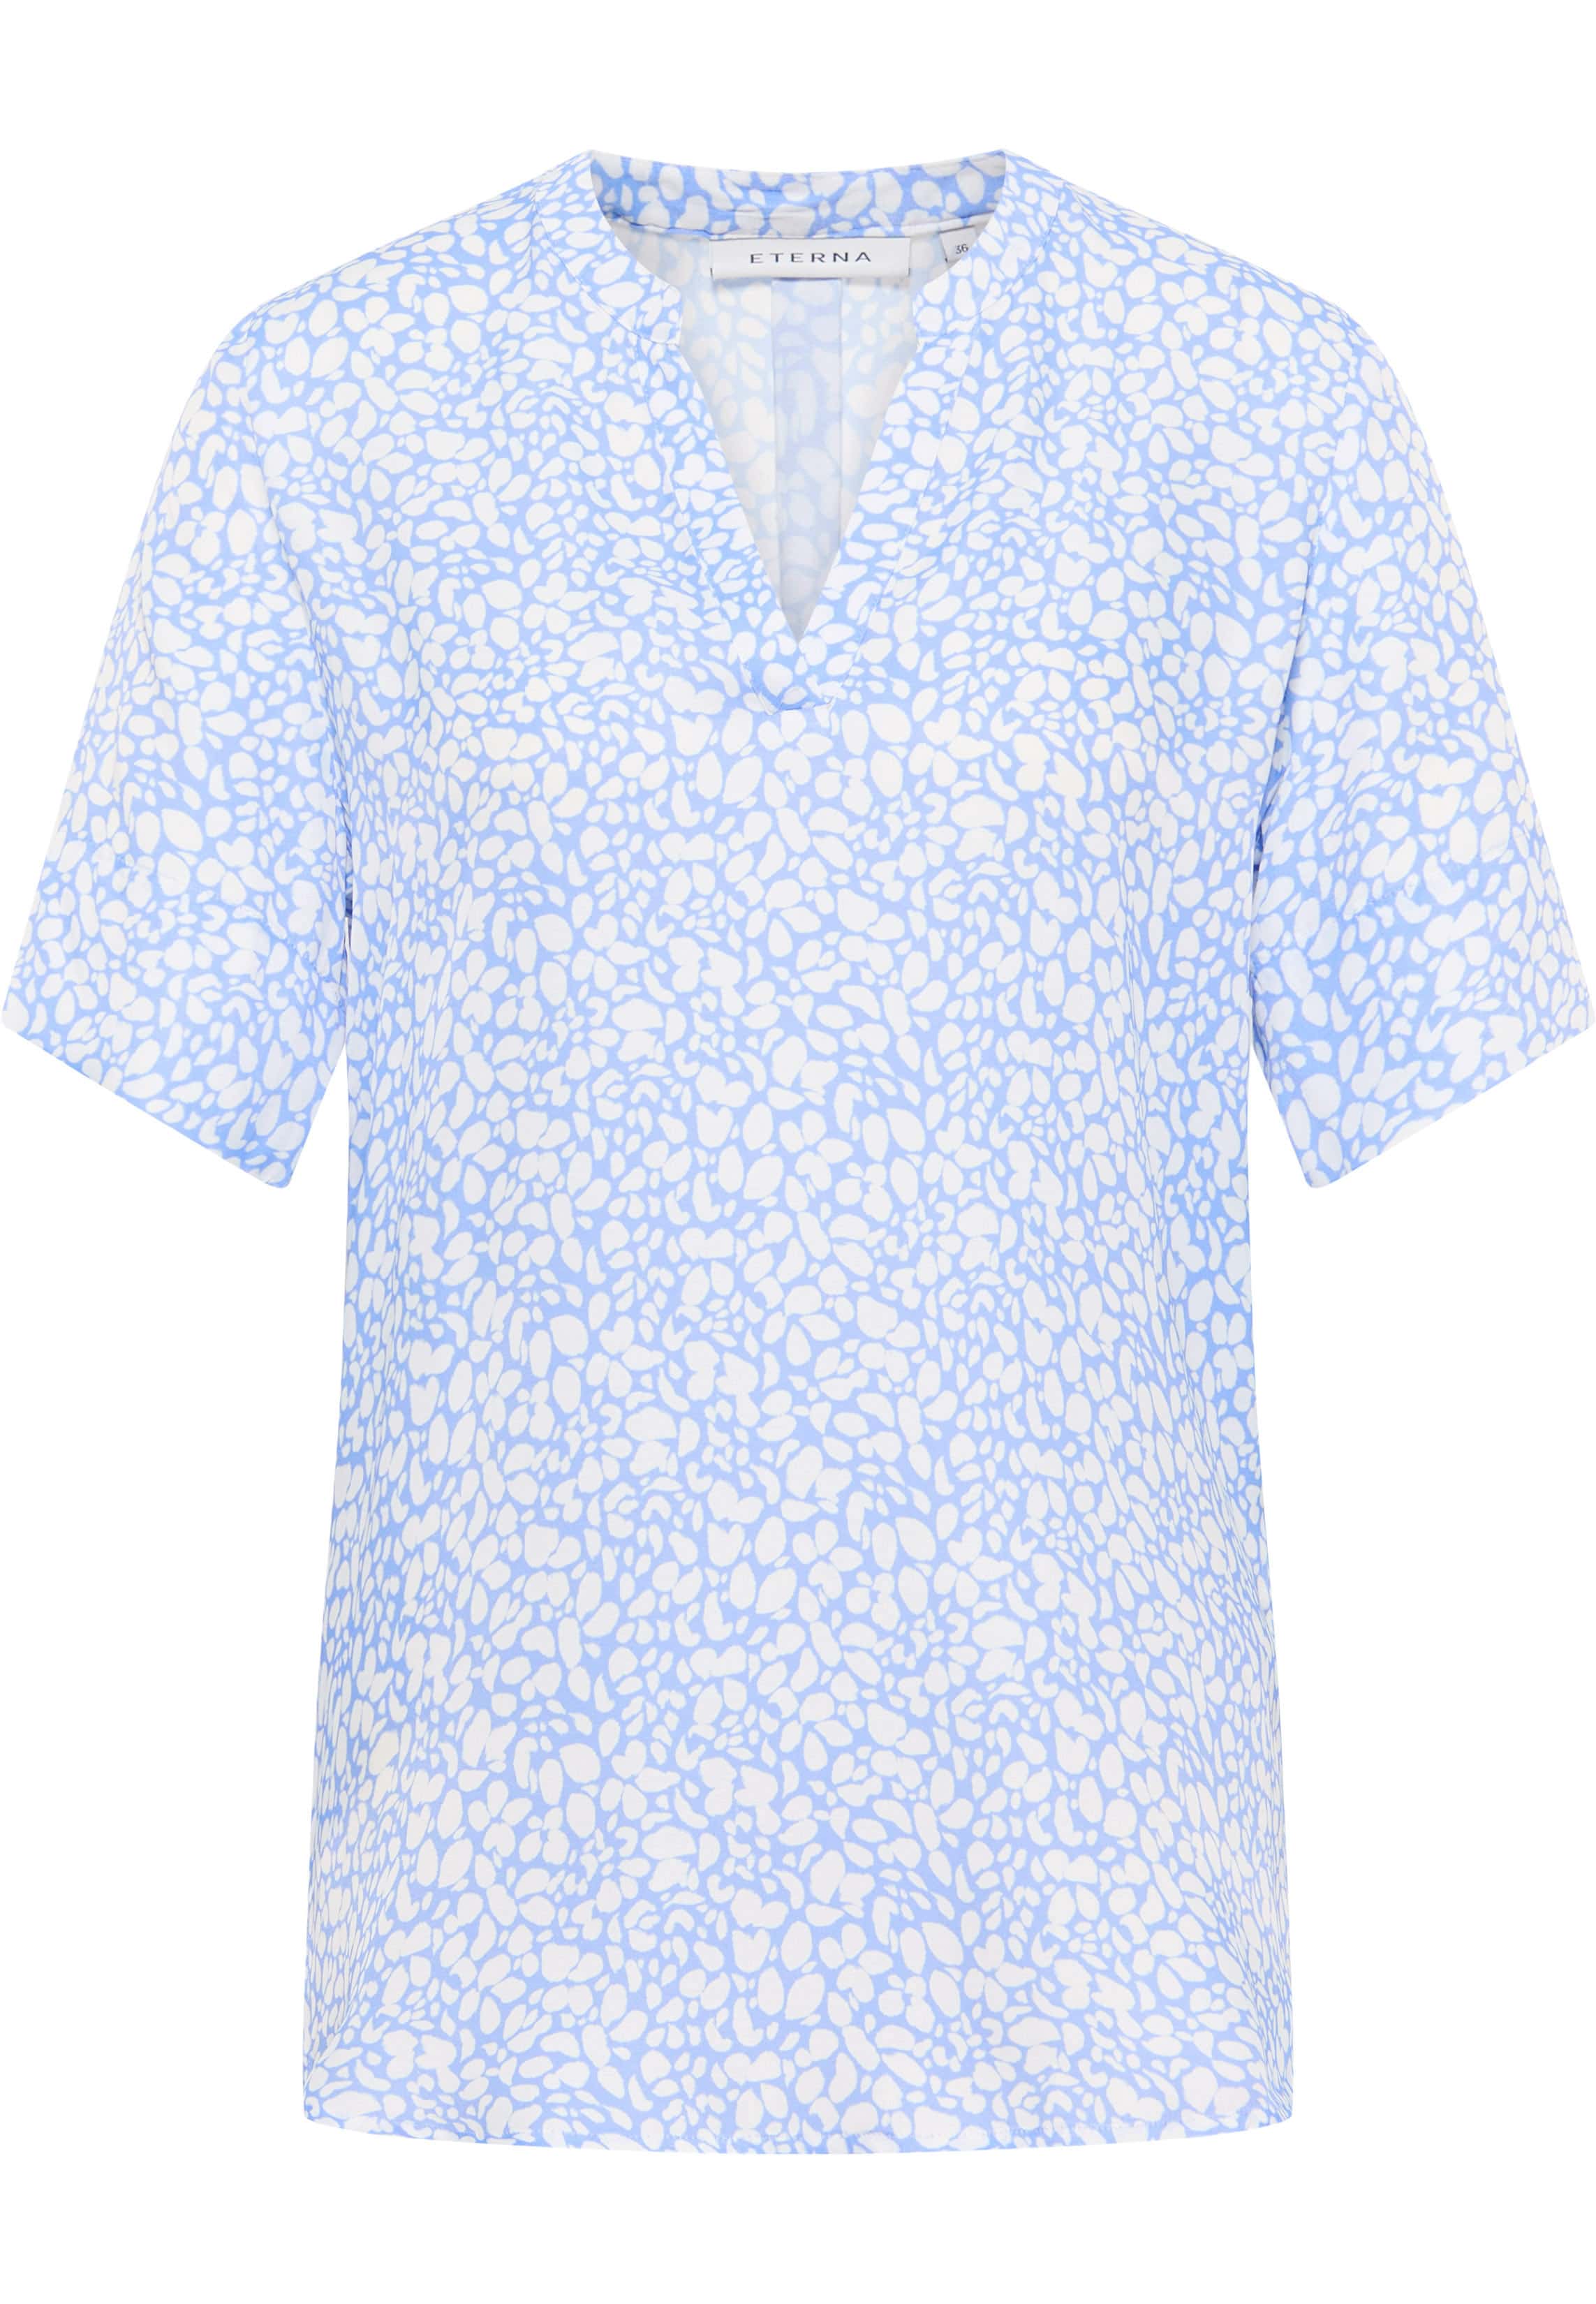 tunic in light blue printed